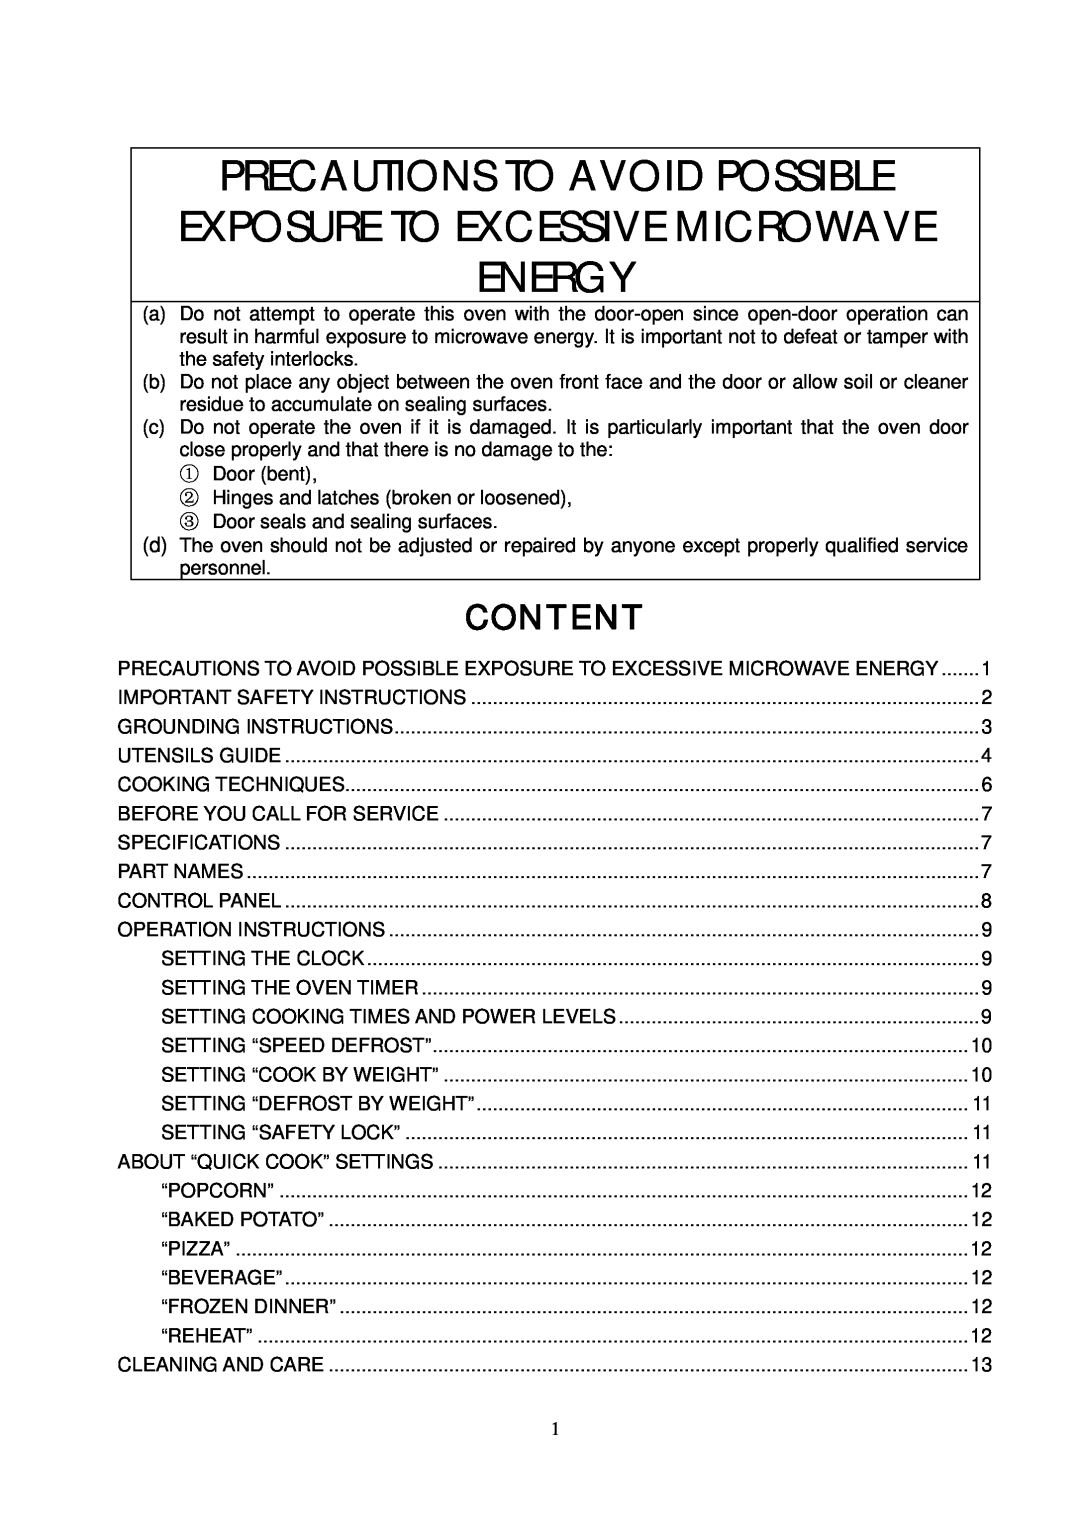 RCA RMW768 owner manual Precautions To Avoid Possible, Exposure To Excessive Microwave Energy, Content 